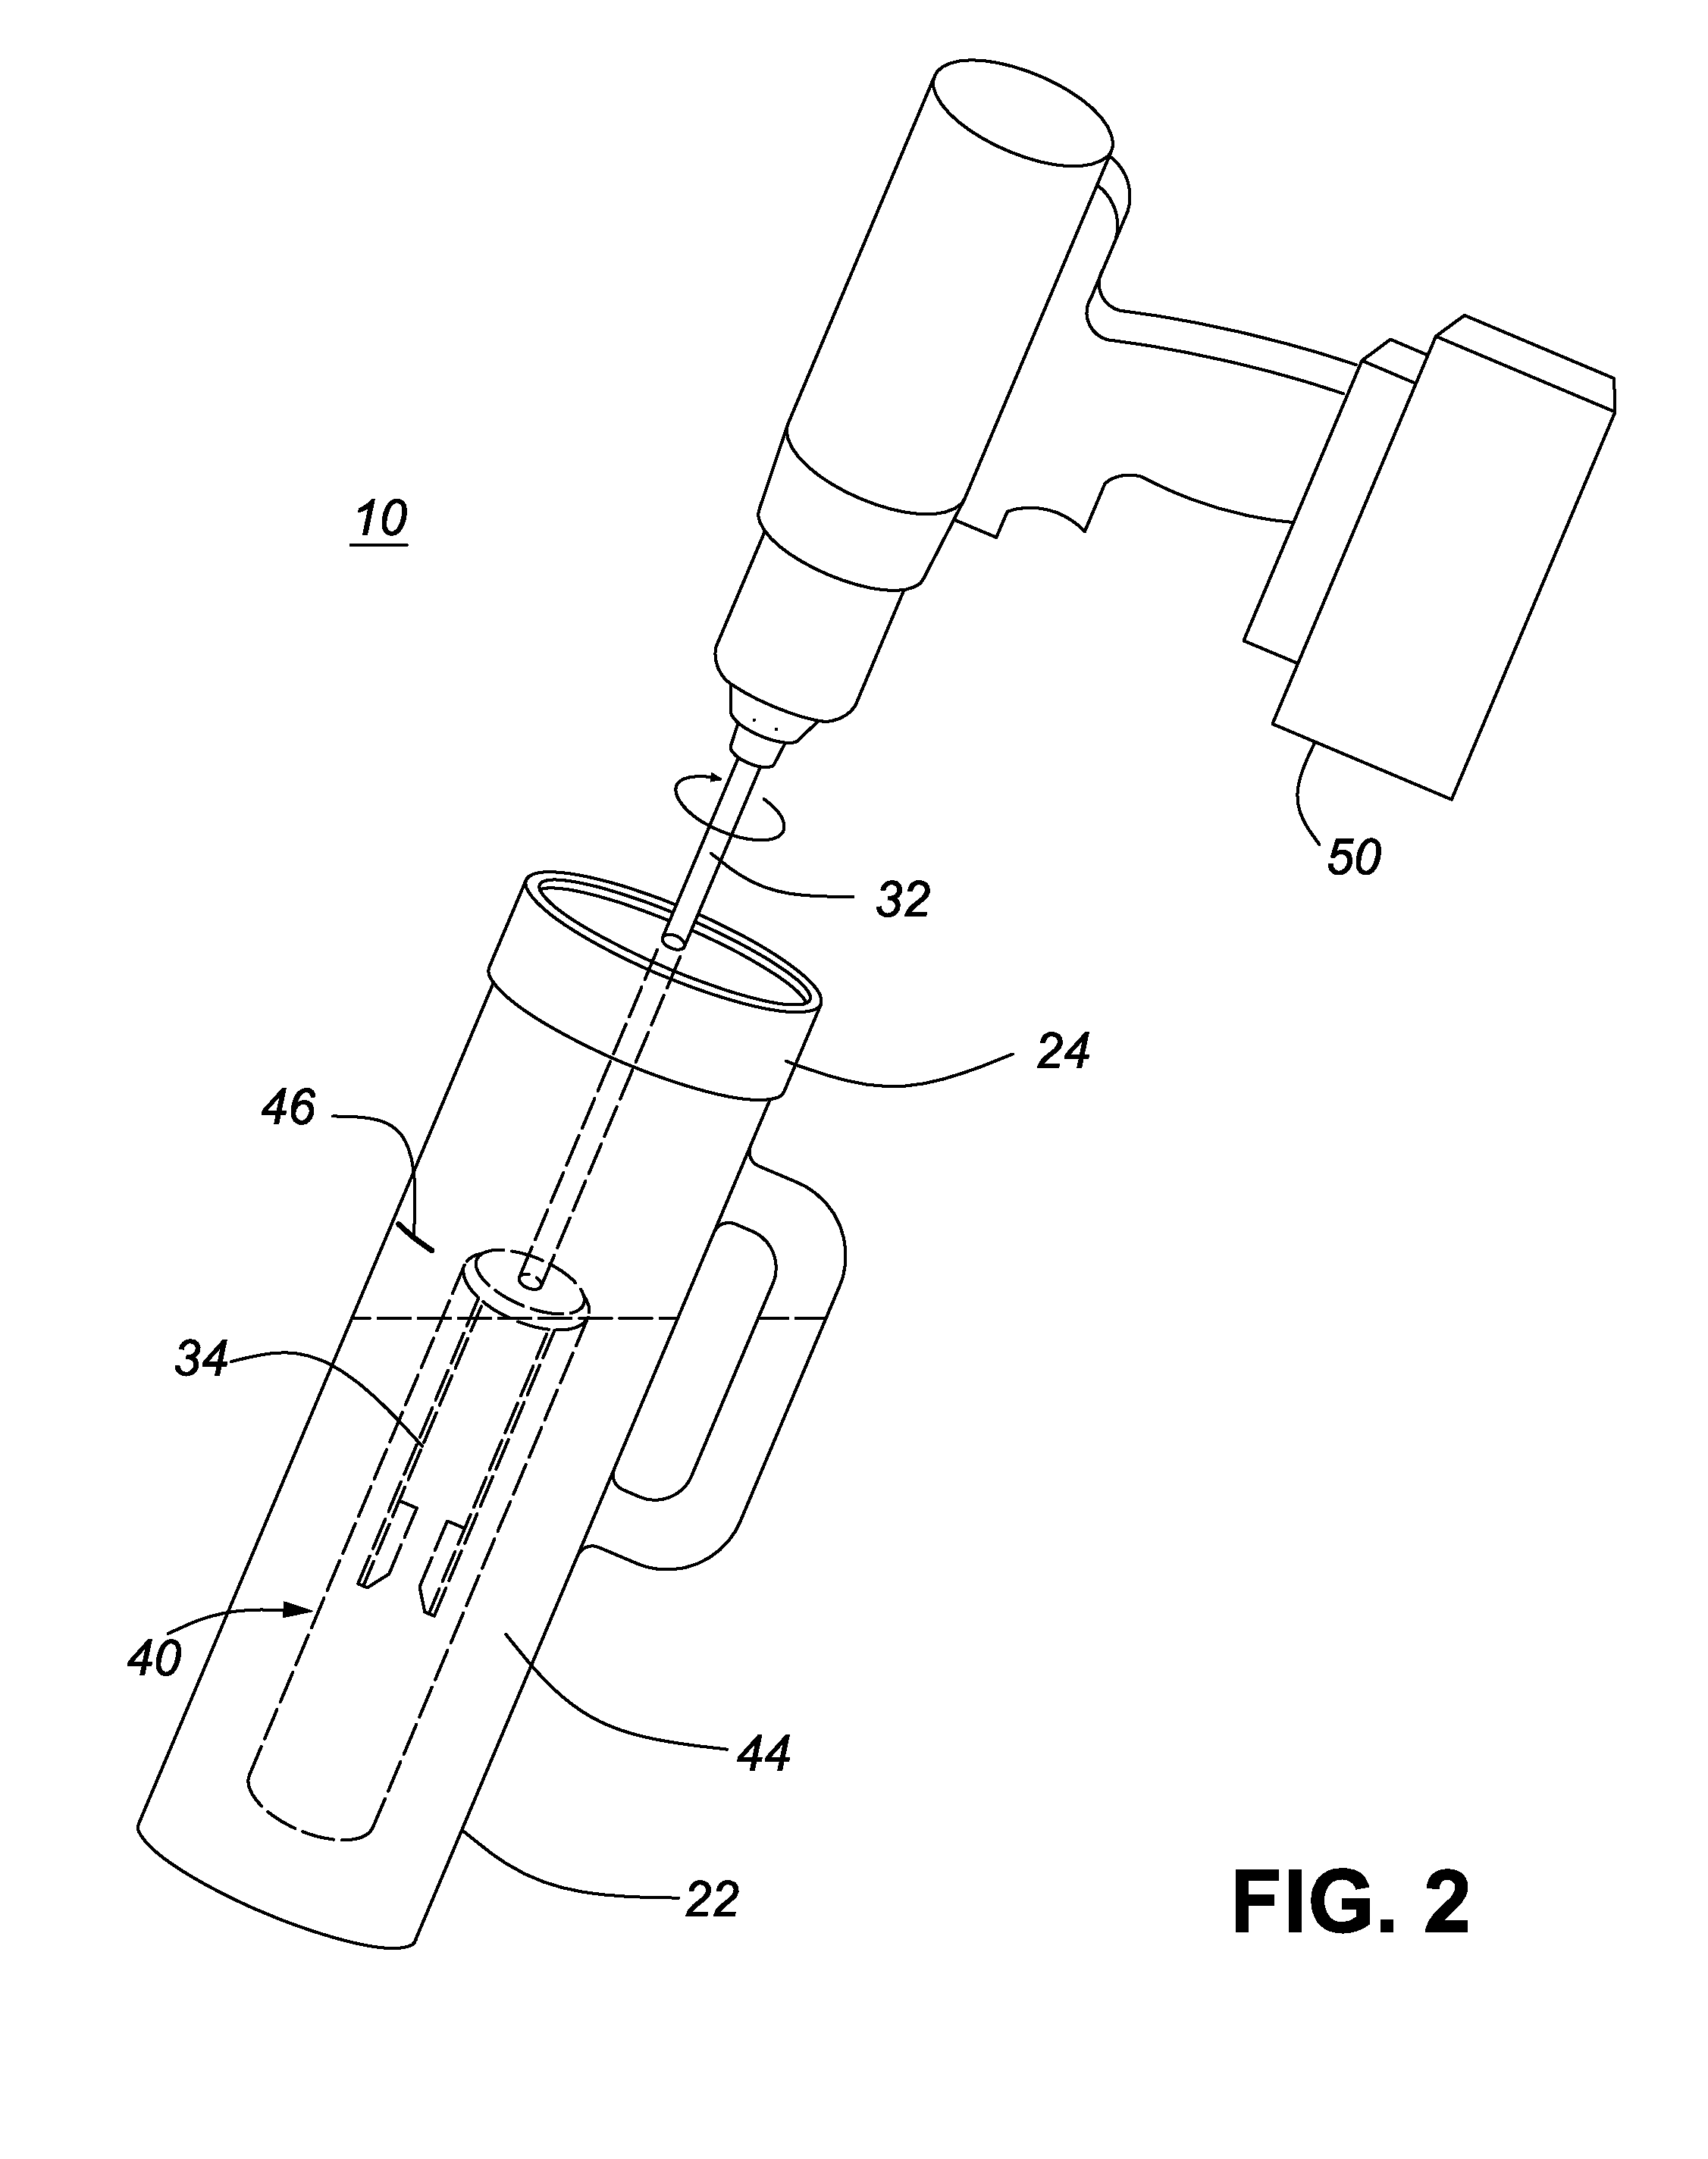 Apparatus for cleaning paint rollers and brushes